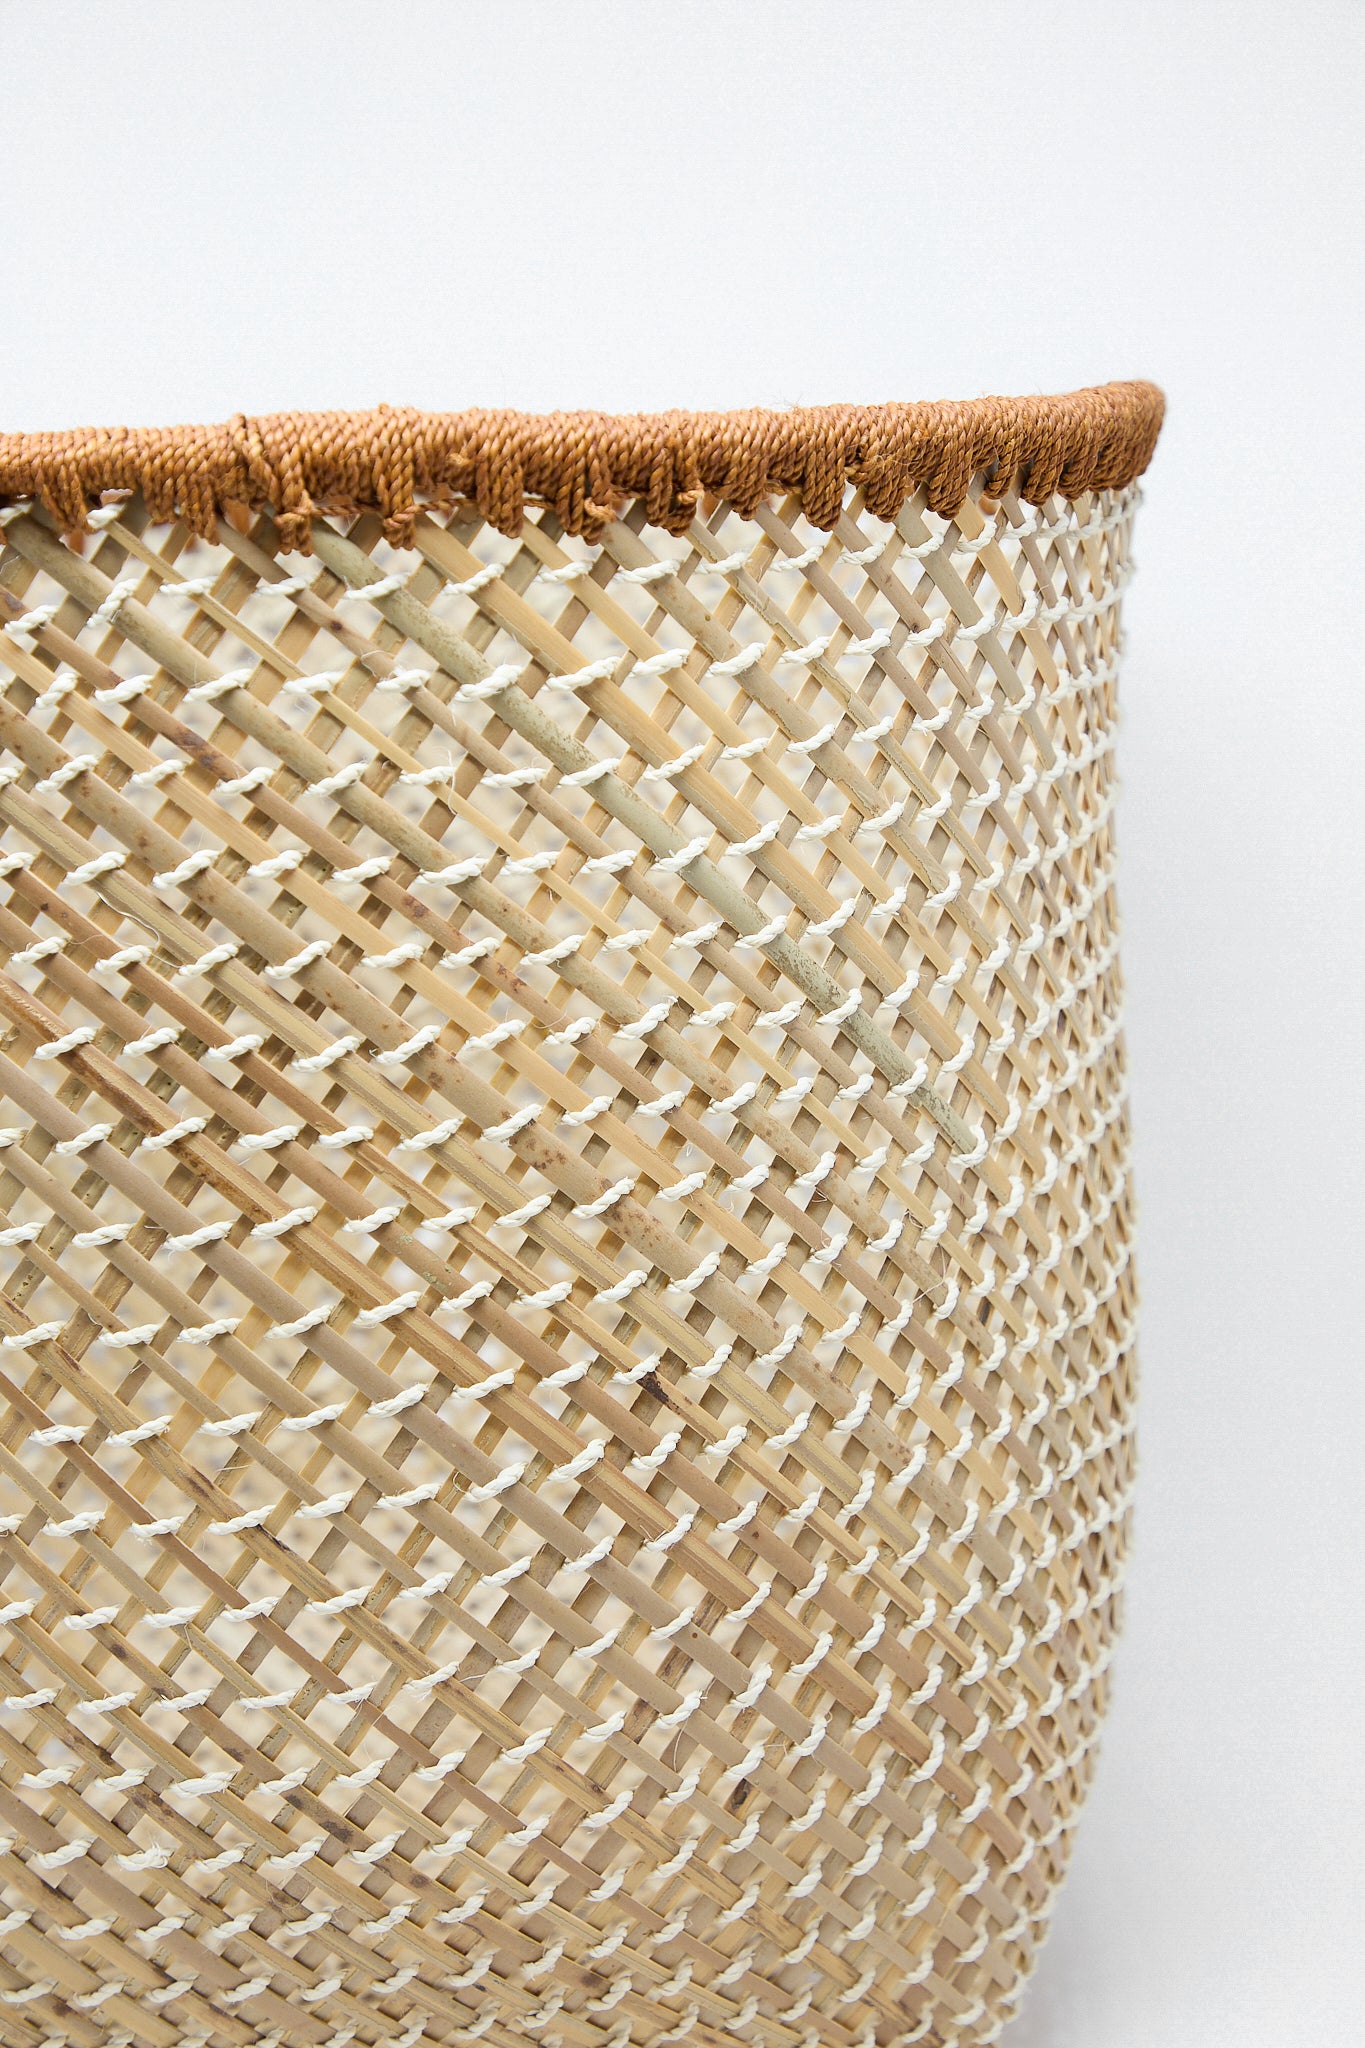 A Plaza Bolivar Niga Open Weave Basket in Rust, crafted by an indigenous community in Latin America, showcased on a white background.